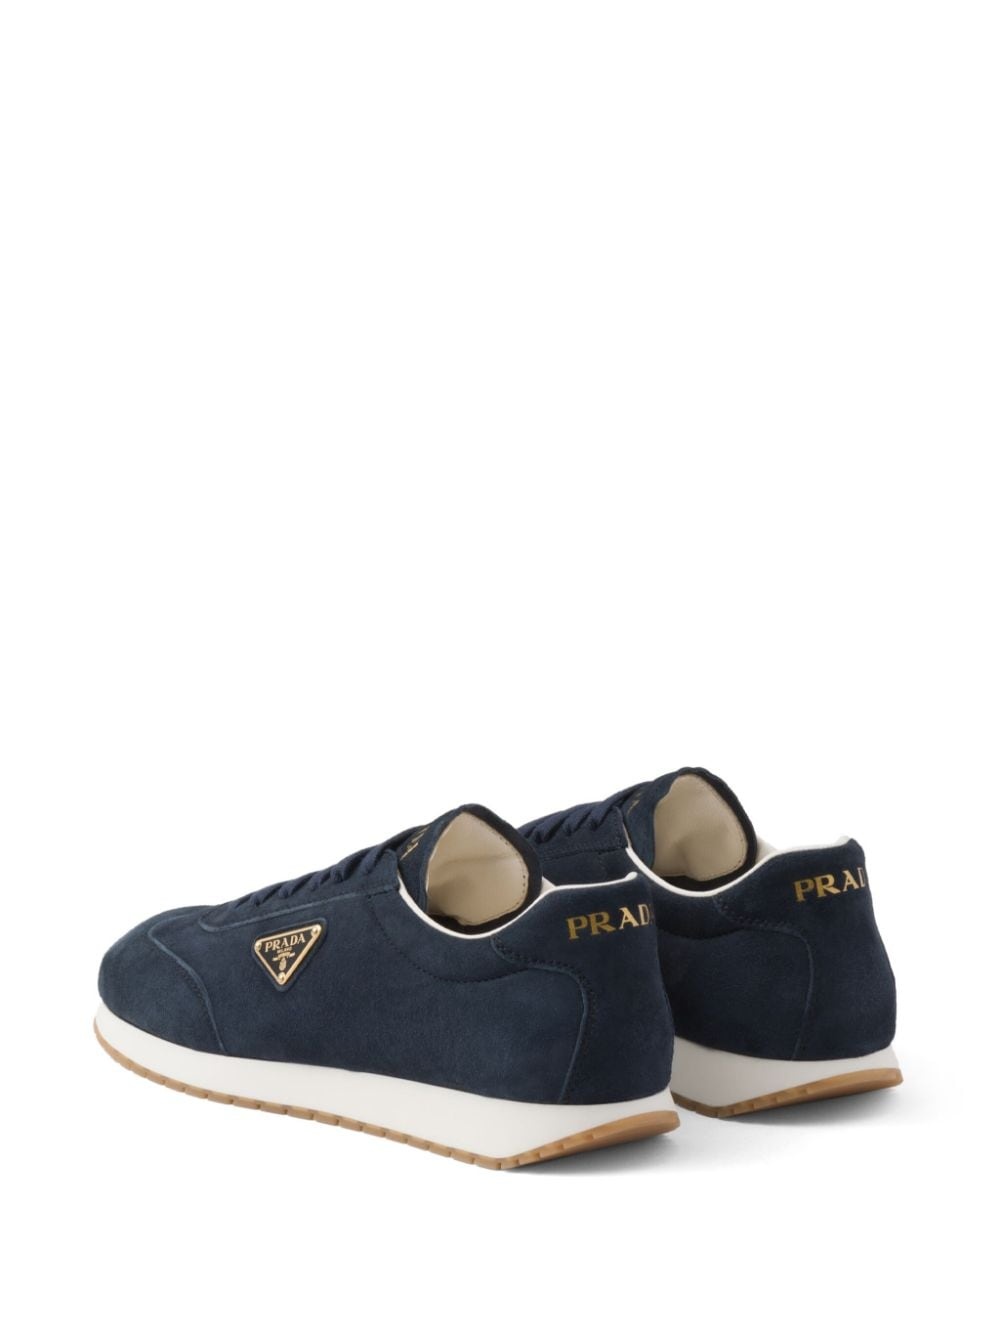 triangle-logo suede sneakers - 3